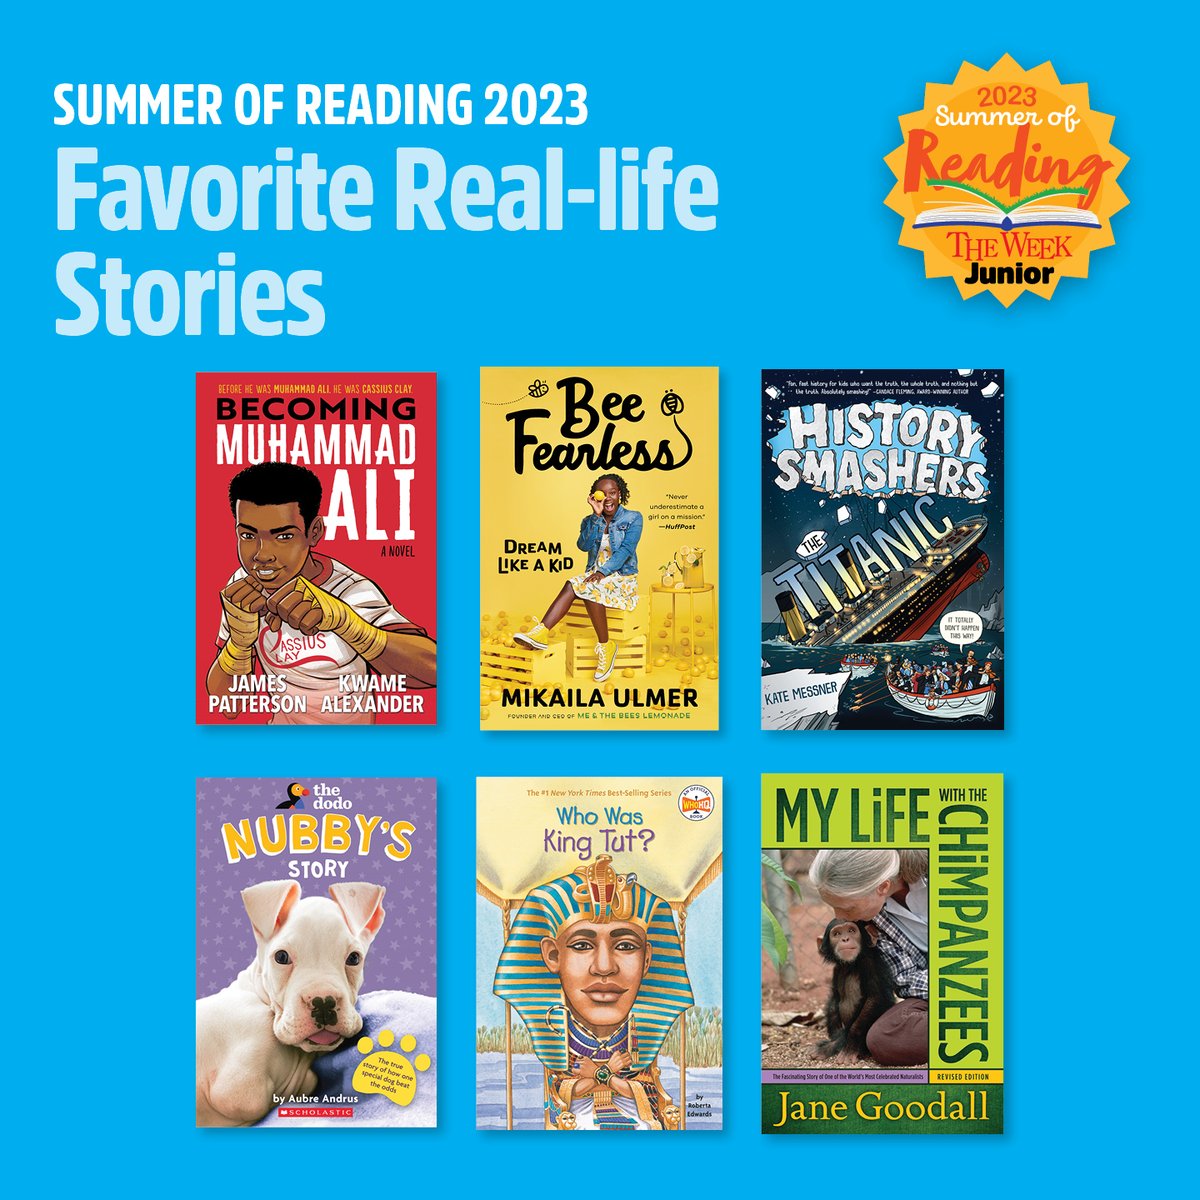 We asked kids across the country to tell us which books they love the most! These are their favorite real-life stories. 😎📚 #SummerOfReading

@JP_Books @kwamealexander @MikailasBee @KateMessner @MattHTaylor @janegoodallinst @aubreandrus @randomhousekids @penguinkids @Scholastic